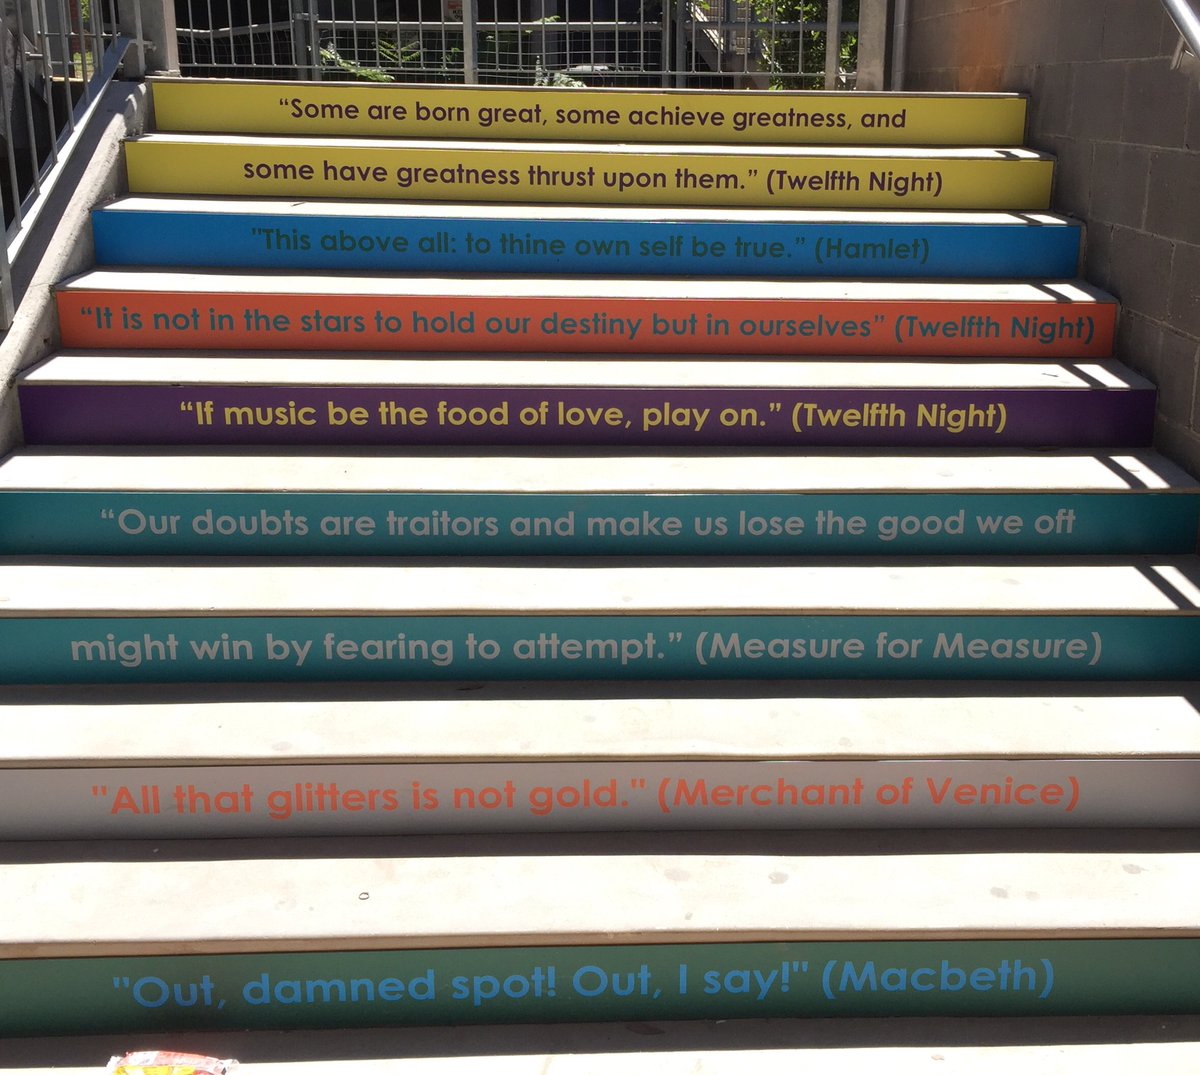 Reimagining our spaces as part of the Innovate Now Project. Check out Shakespeare on our Library stairs! #scsinnovate @AboutCS @Iris827